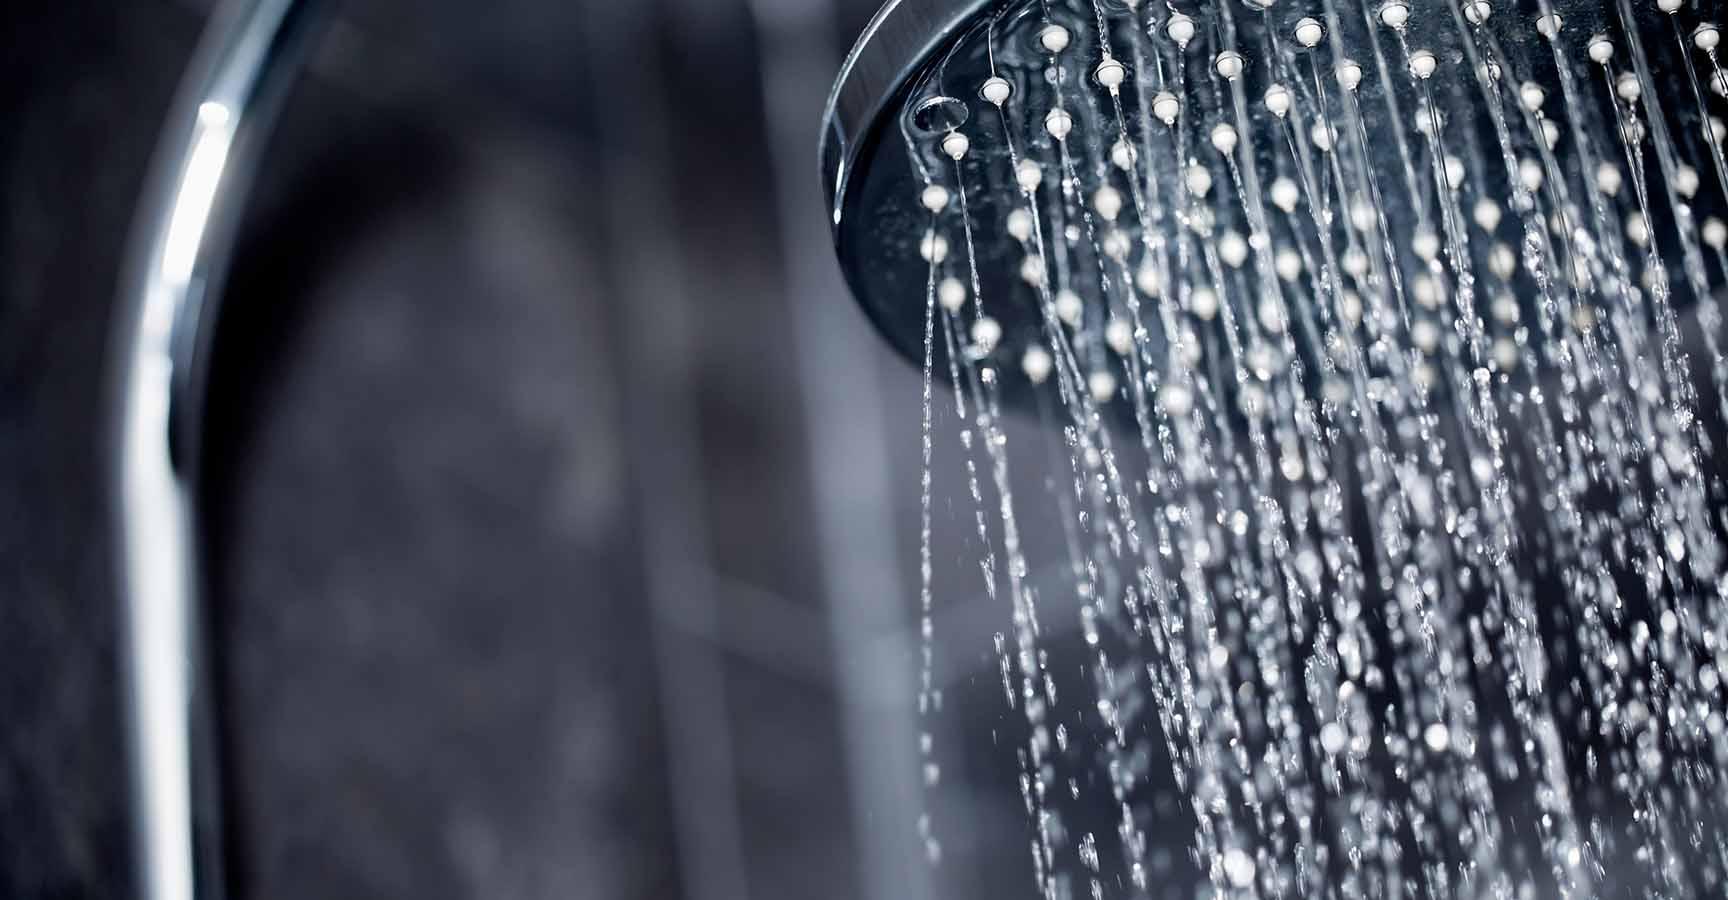 Close up view of large shower head sprinkling water with black tiles in the background.